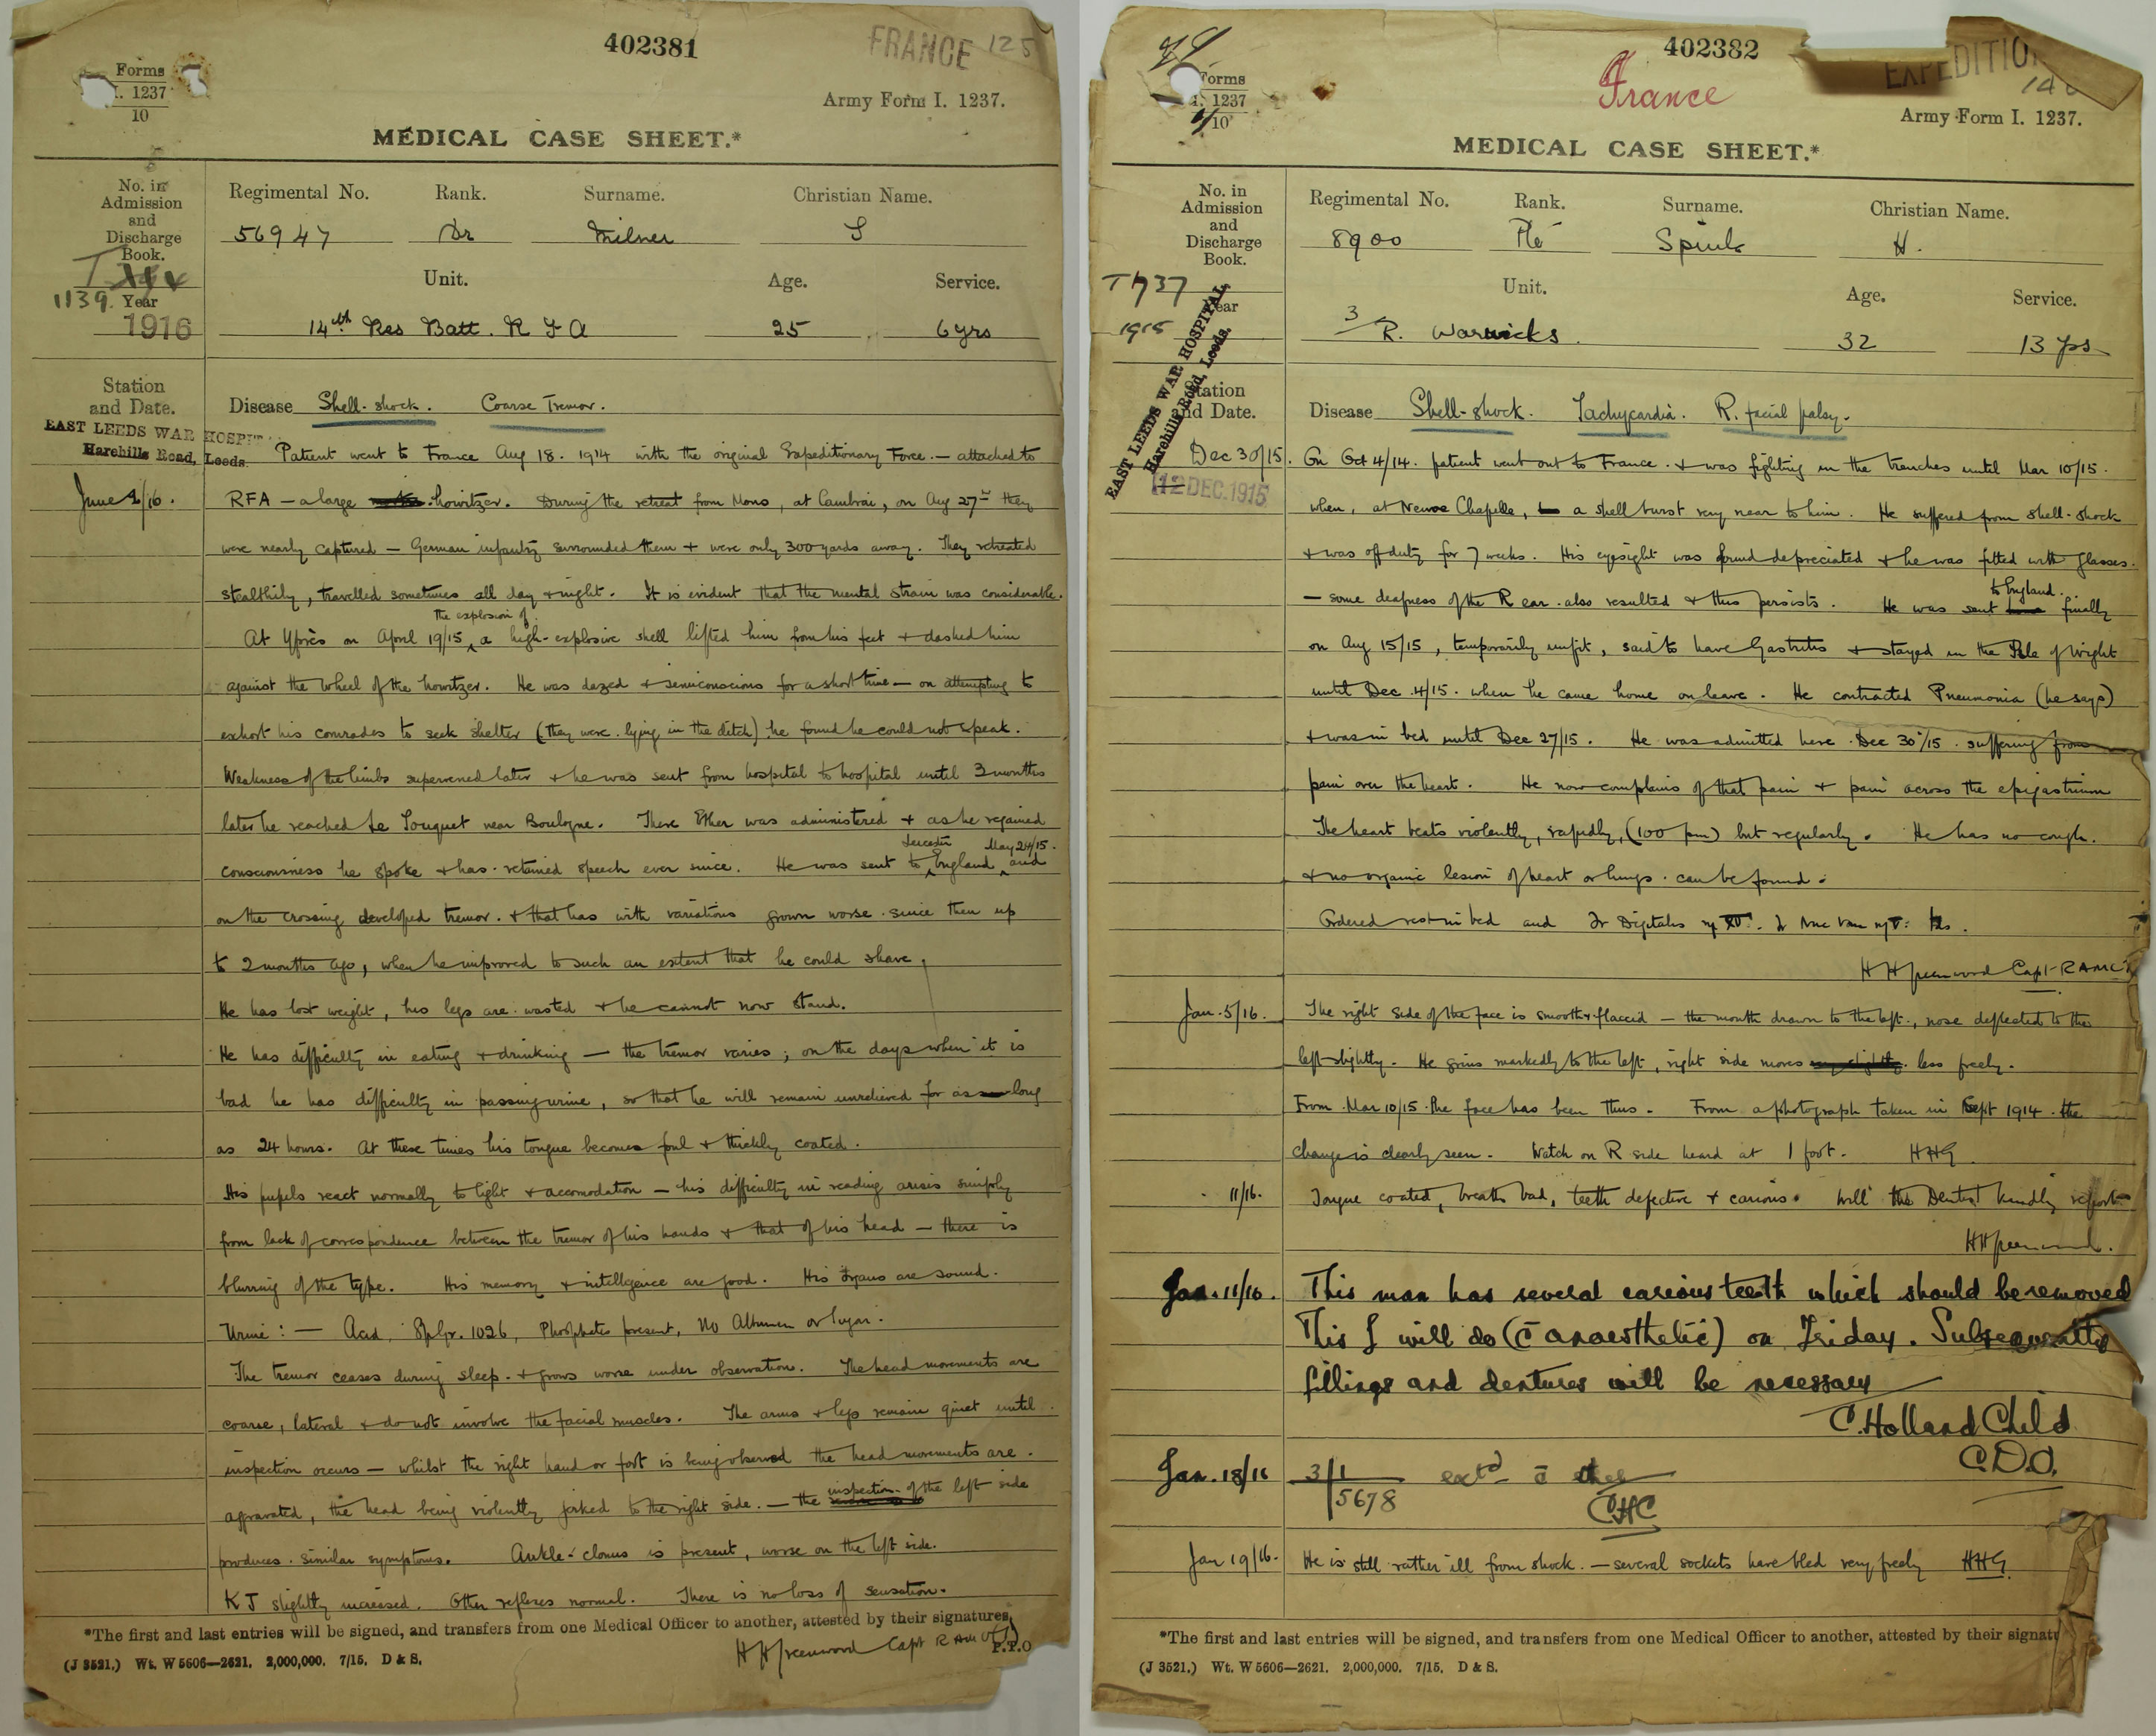 War office report on 'Shell shock' - The National Archives